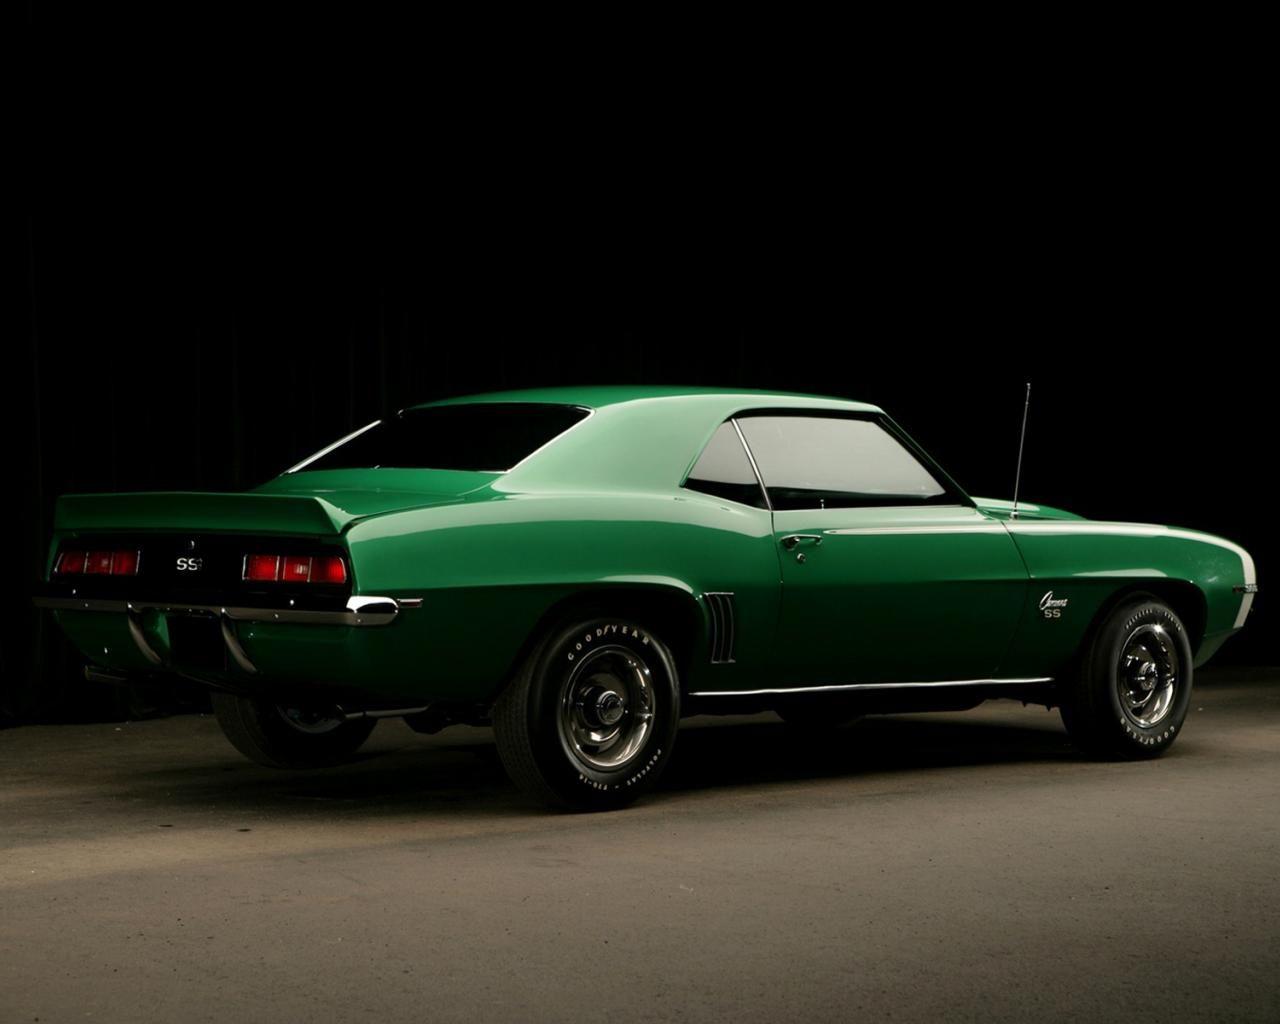 American Muscle Cars Wallpapers Top Free American Muscle Cars